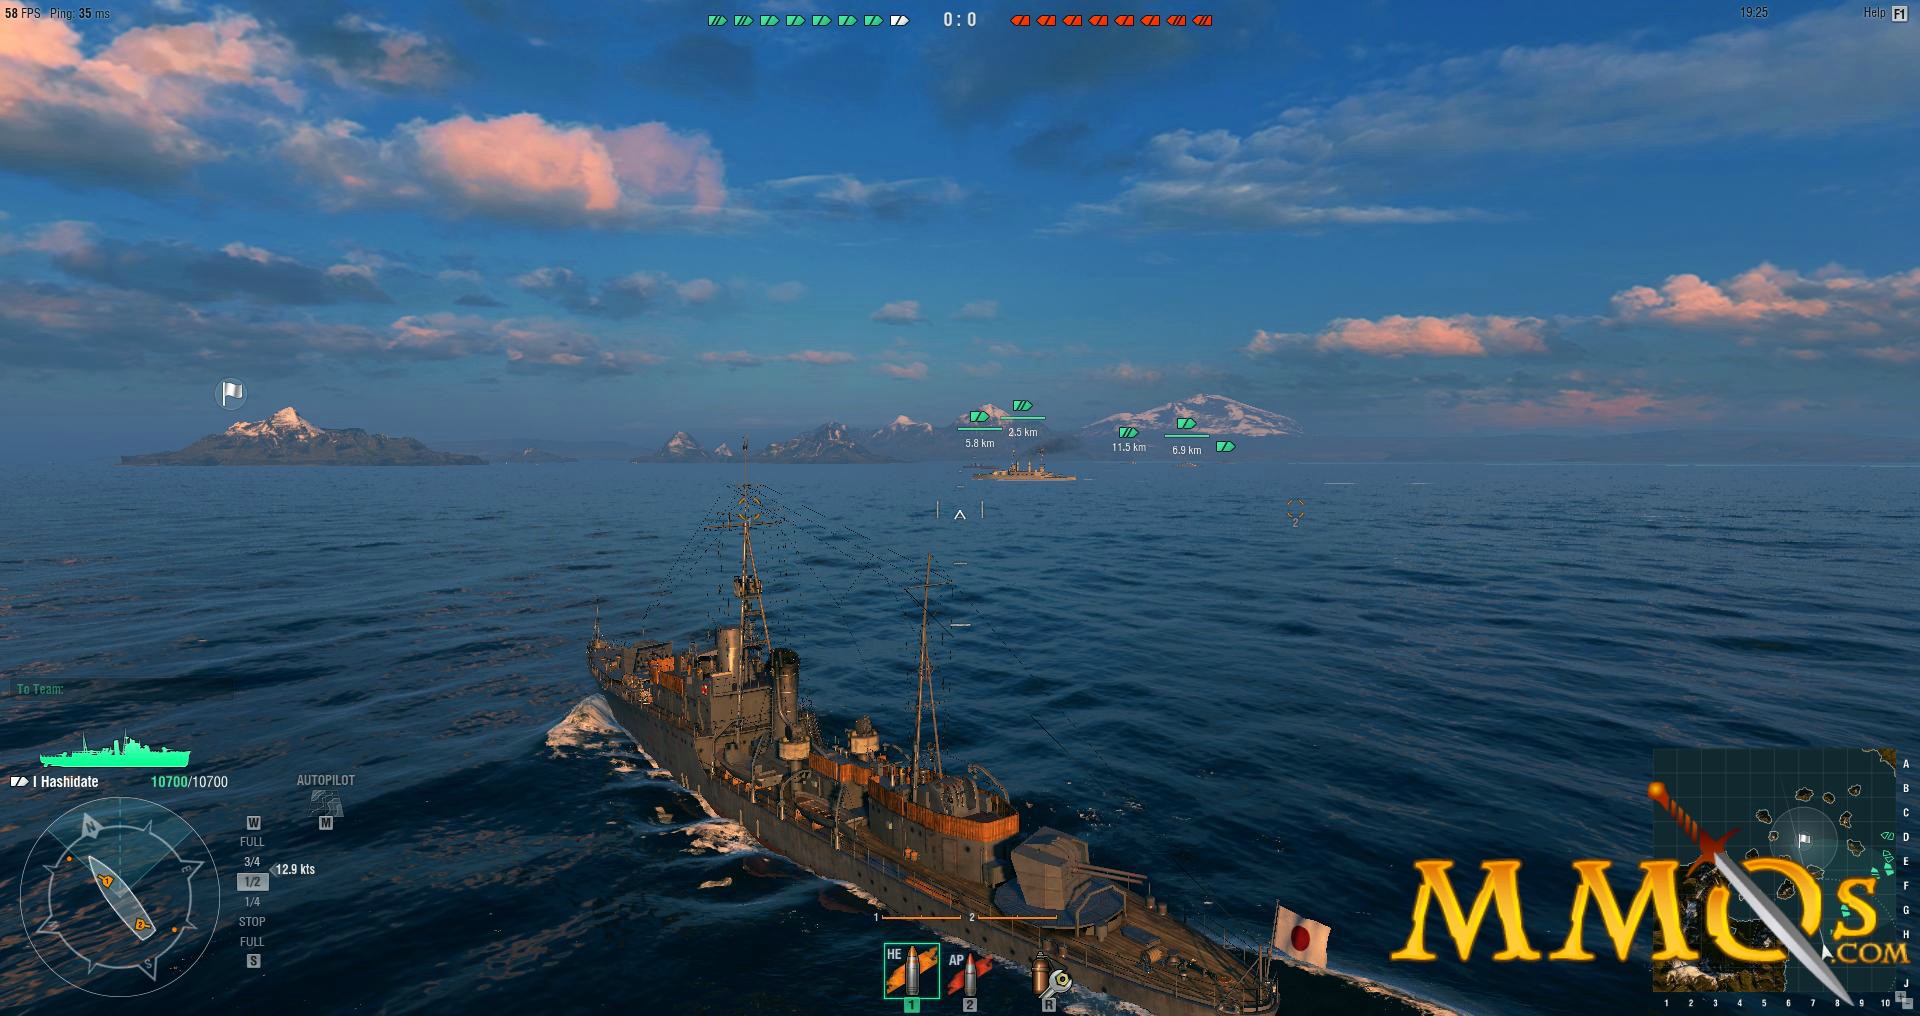 allow warships today to access world of warships game data